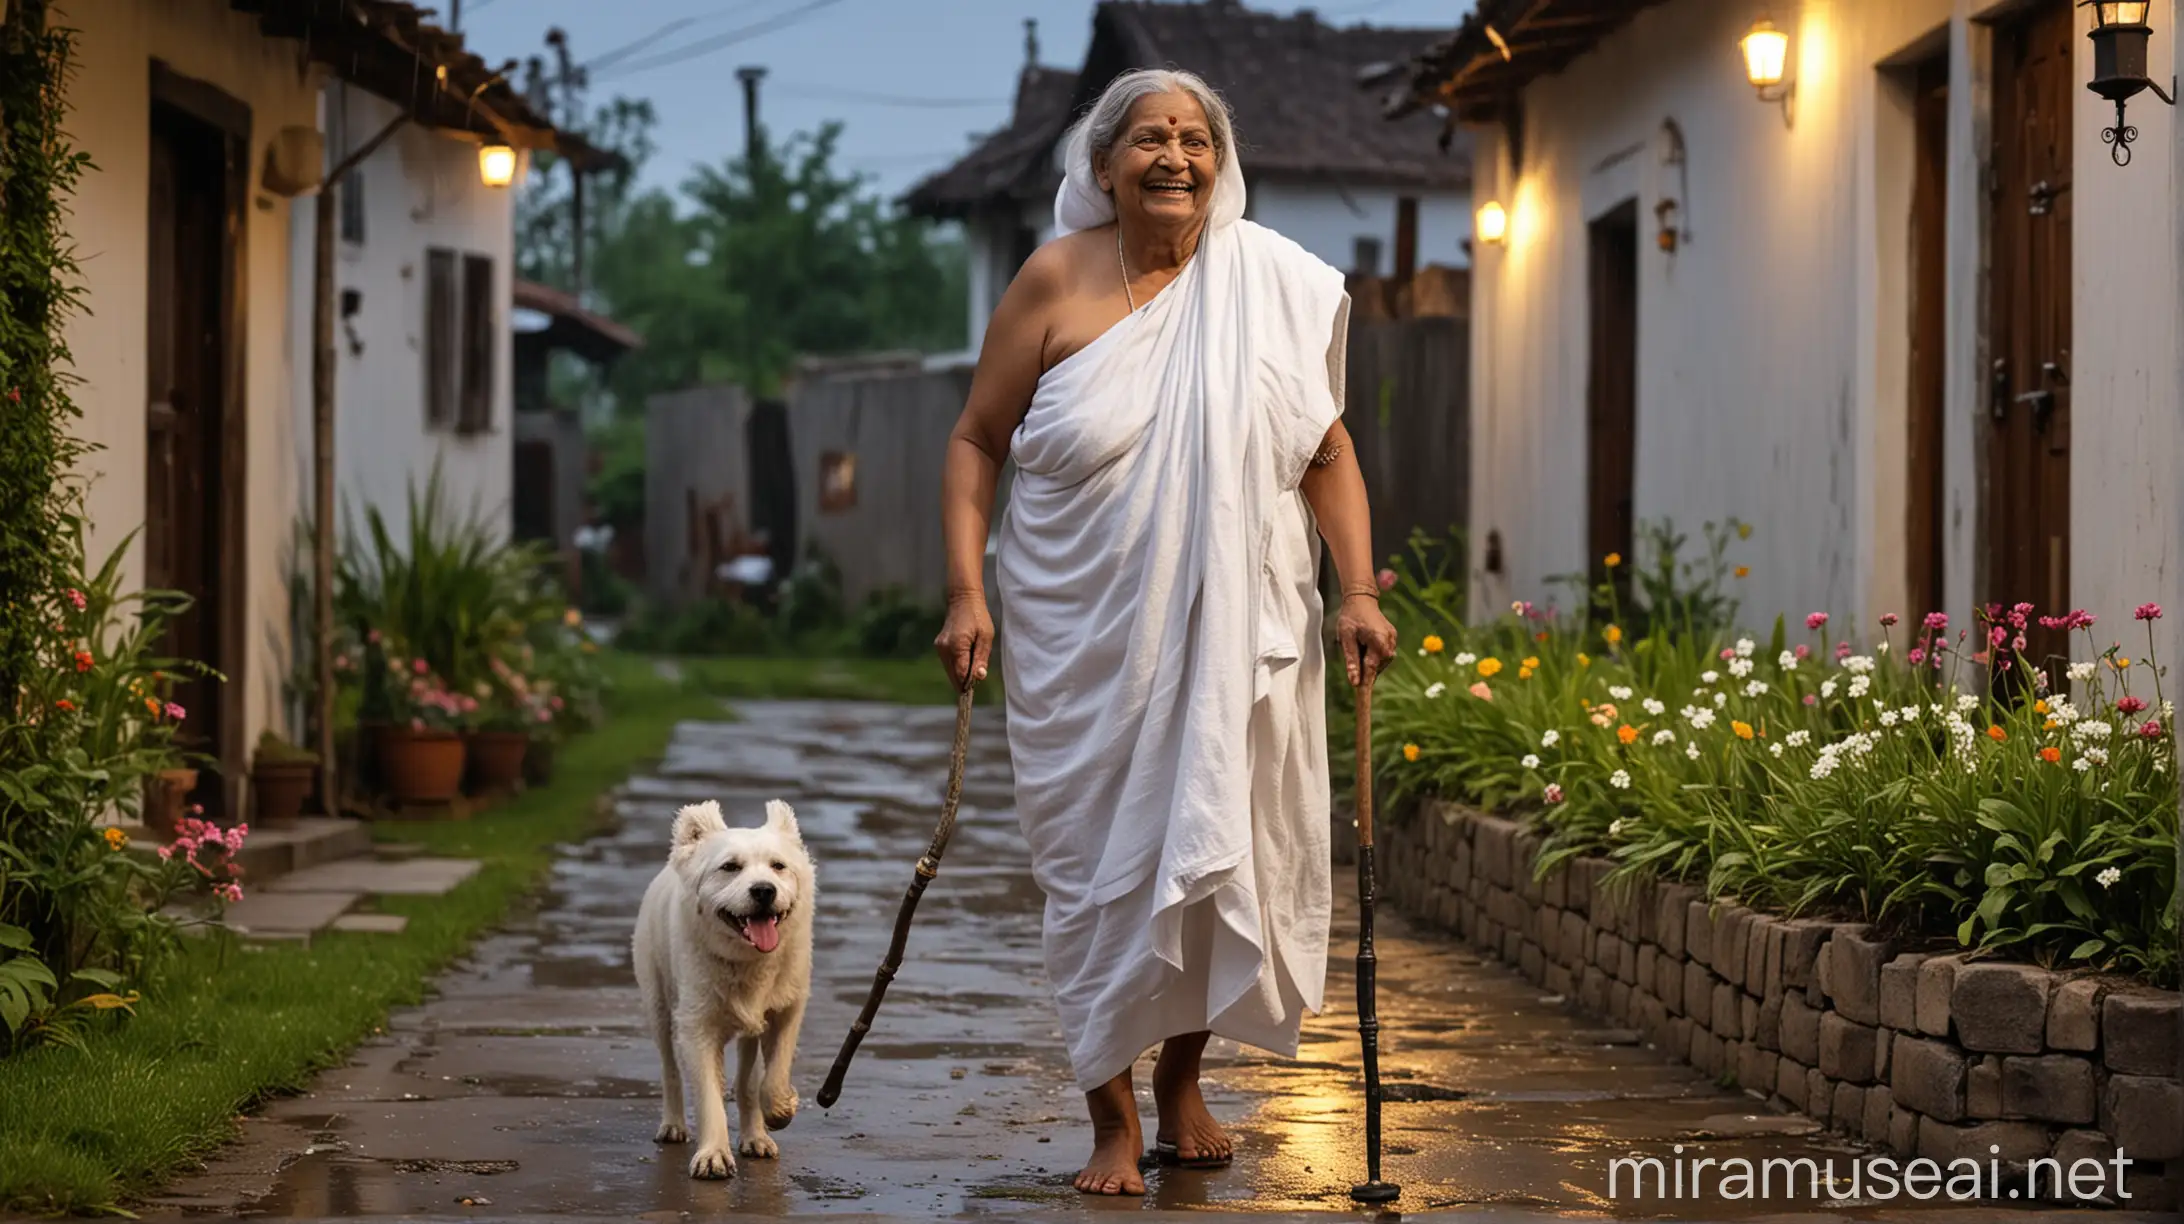 
sweet faced old desi indian very fat  age 70 woman walking with a  single stick wearing a white towel she is happy and laughing . she is bending and standing with her dog  . its night  time and in background there is a old village with bulb light and luxurious house   with flowers and grass and concrete floor and its raining.